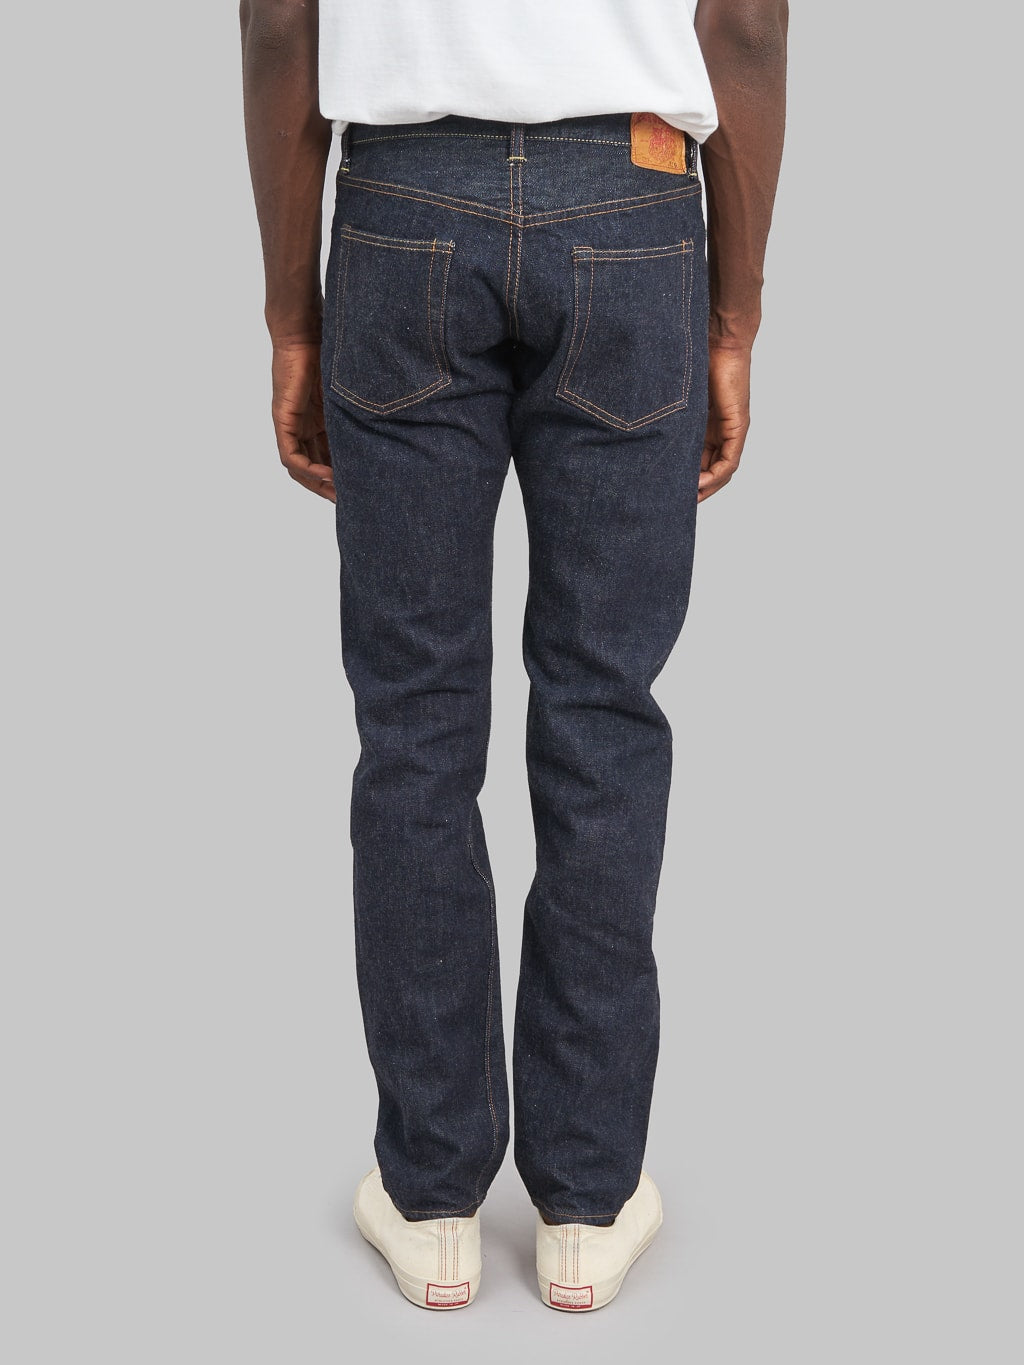 tcb 50s slim jeans t one wash back fit